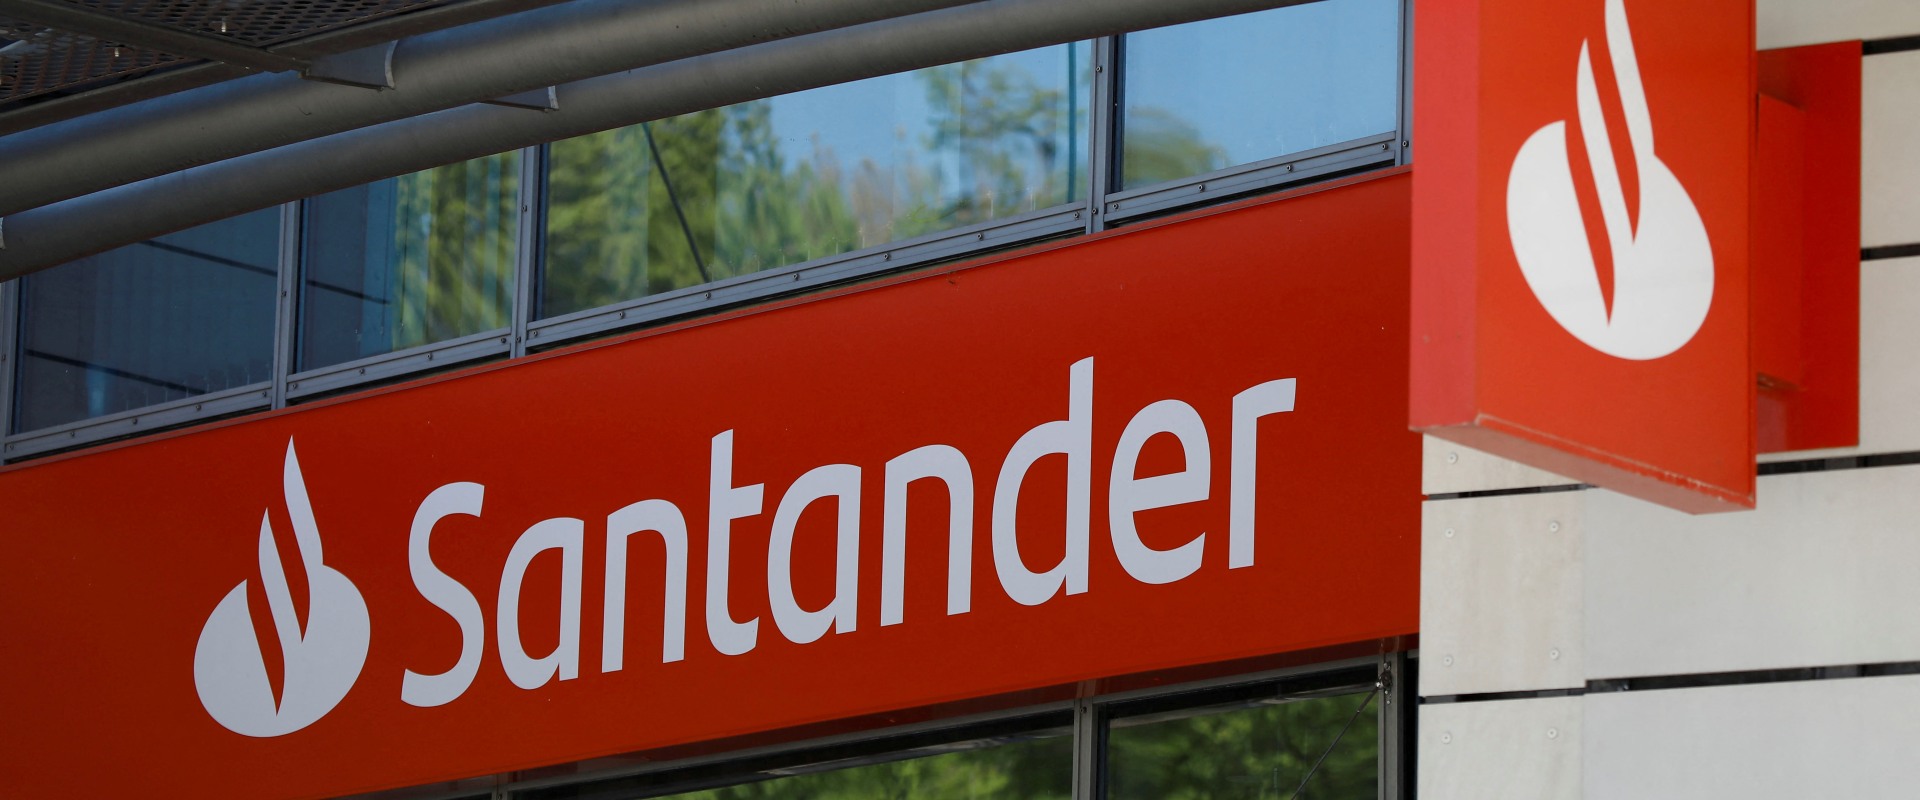 Evaluating Different Types of Santander Mortgages